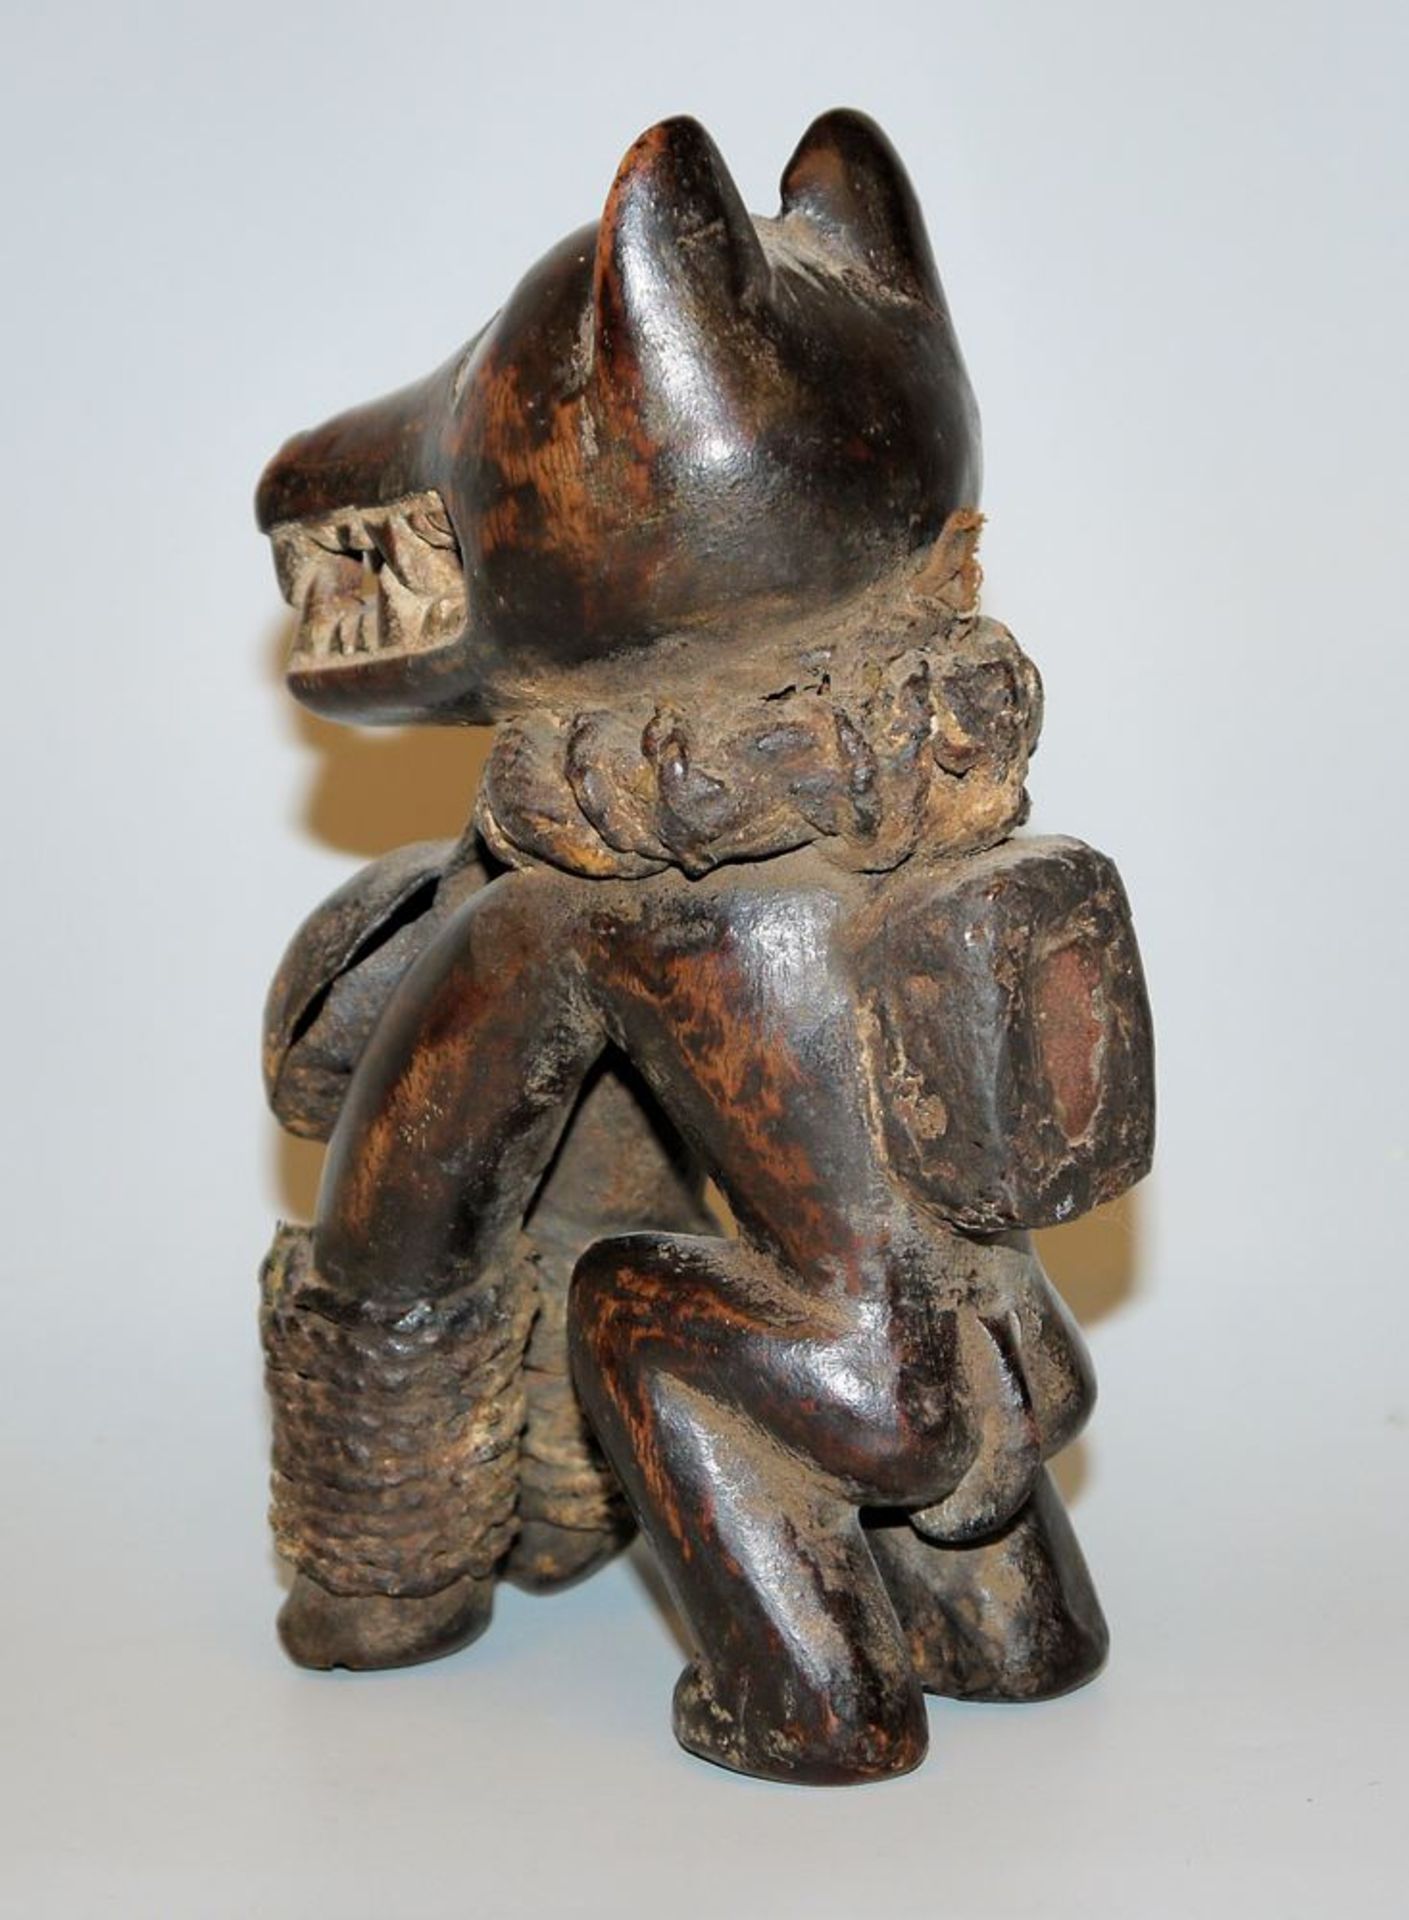 Dog sculpture of the Vili, Congo - Image 2 of 2